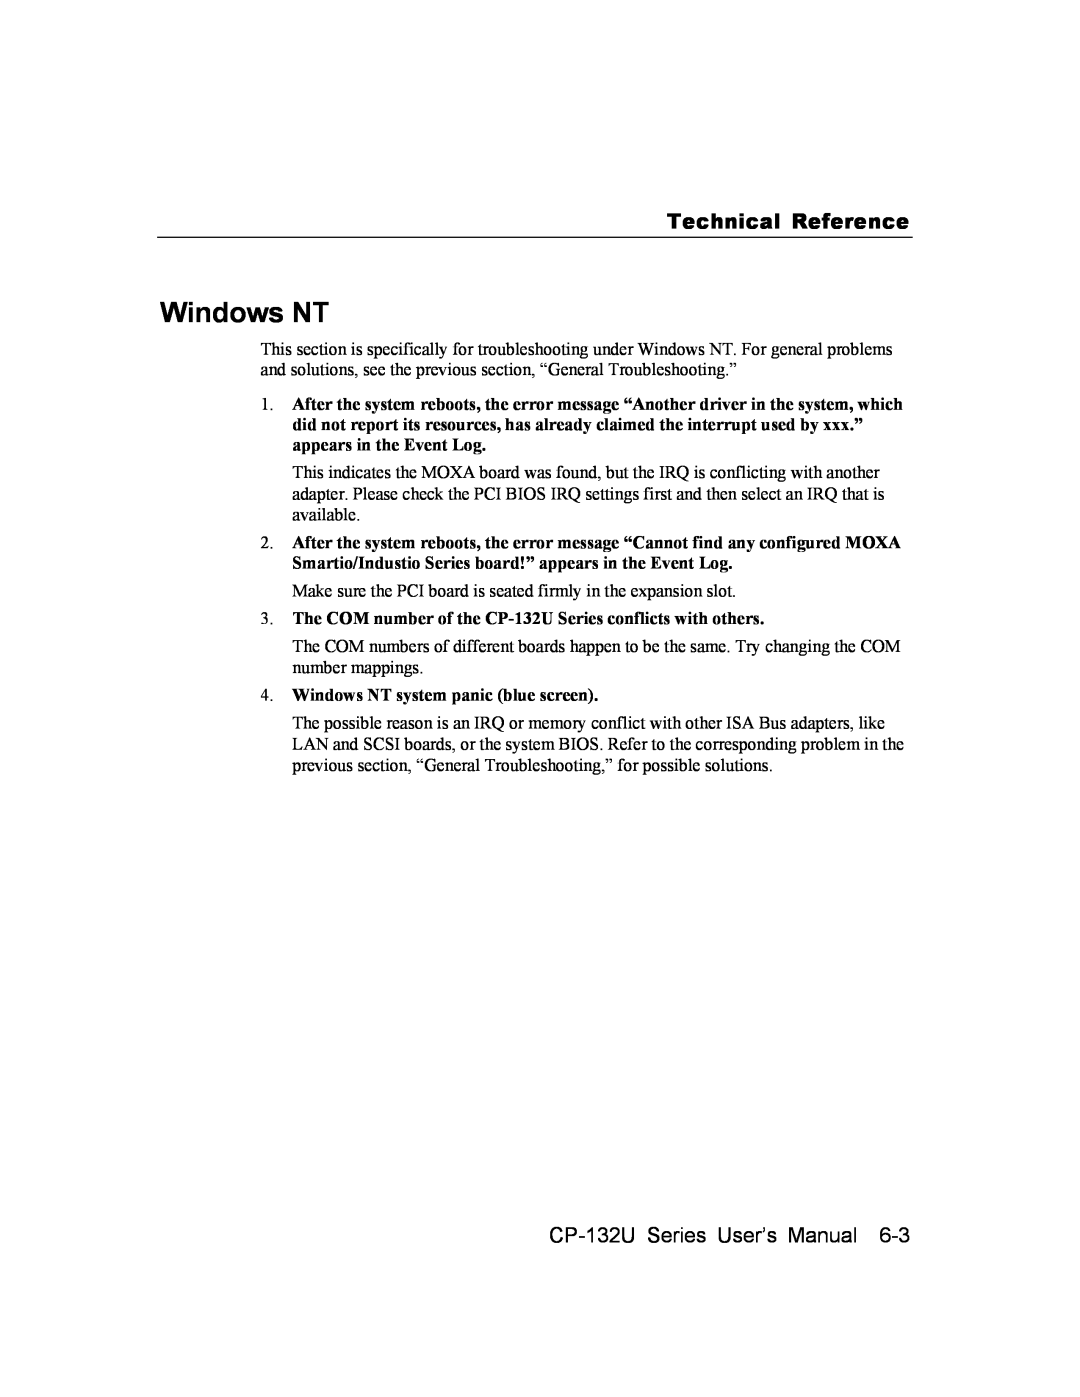 Moxa Technologies Technical Reference, The COM number of the CP-132U Series conflicts with others, Windows NT 